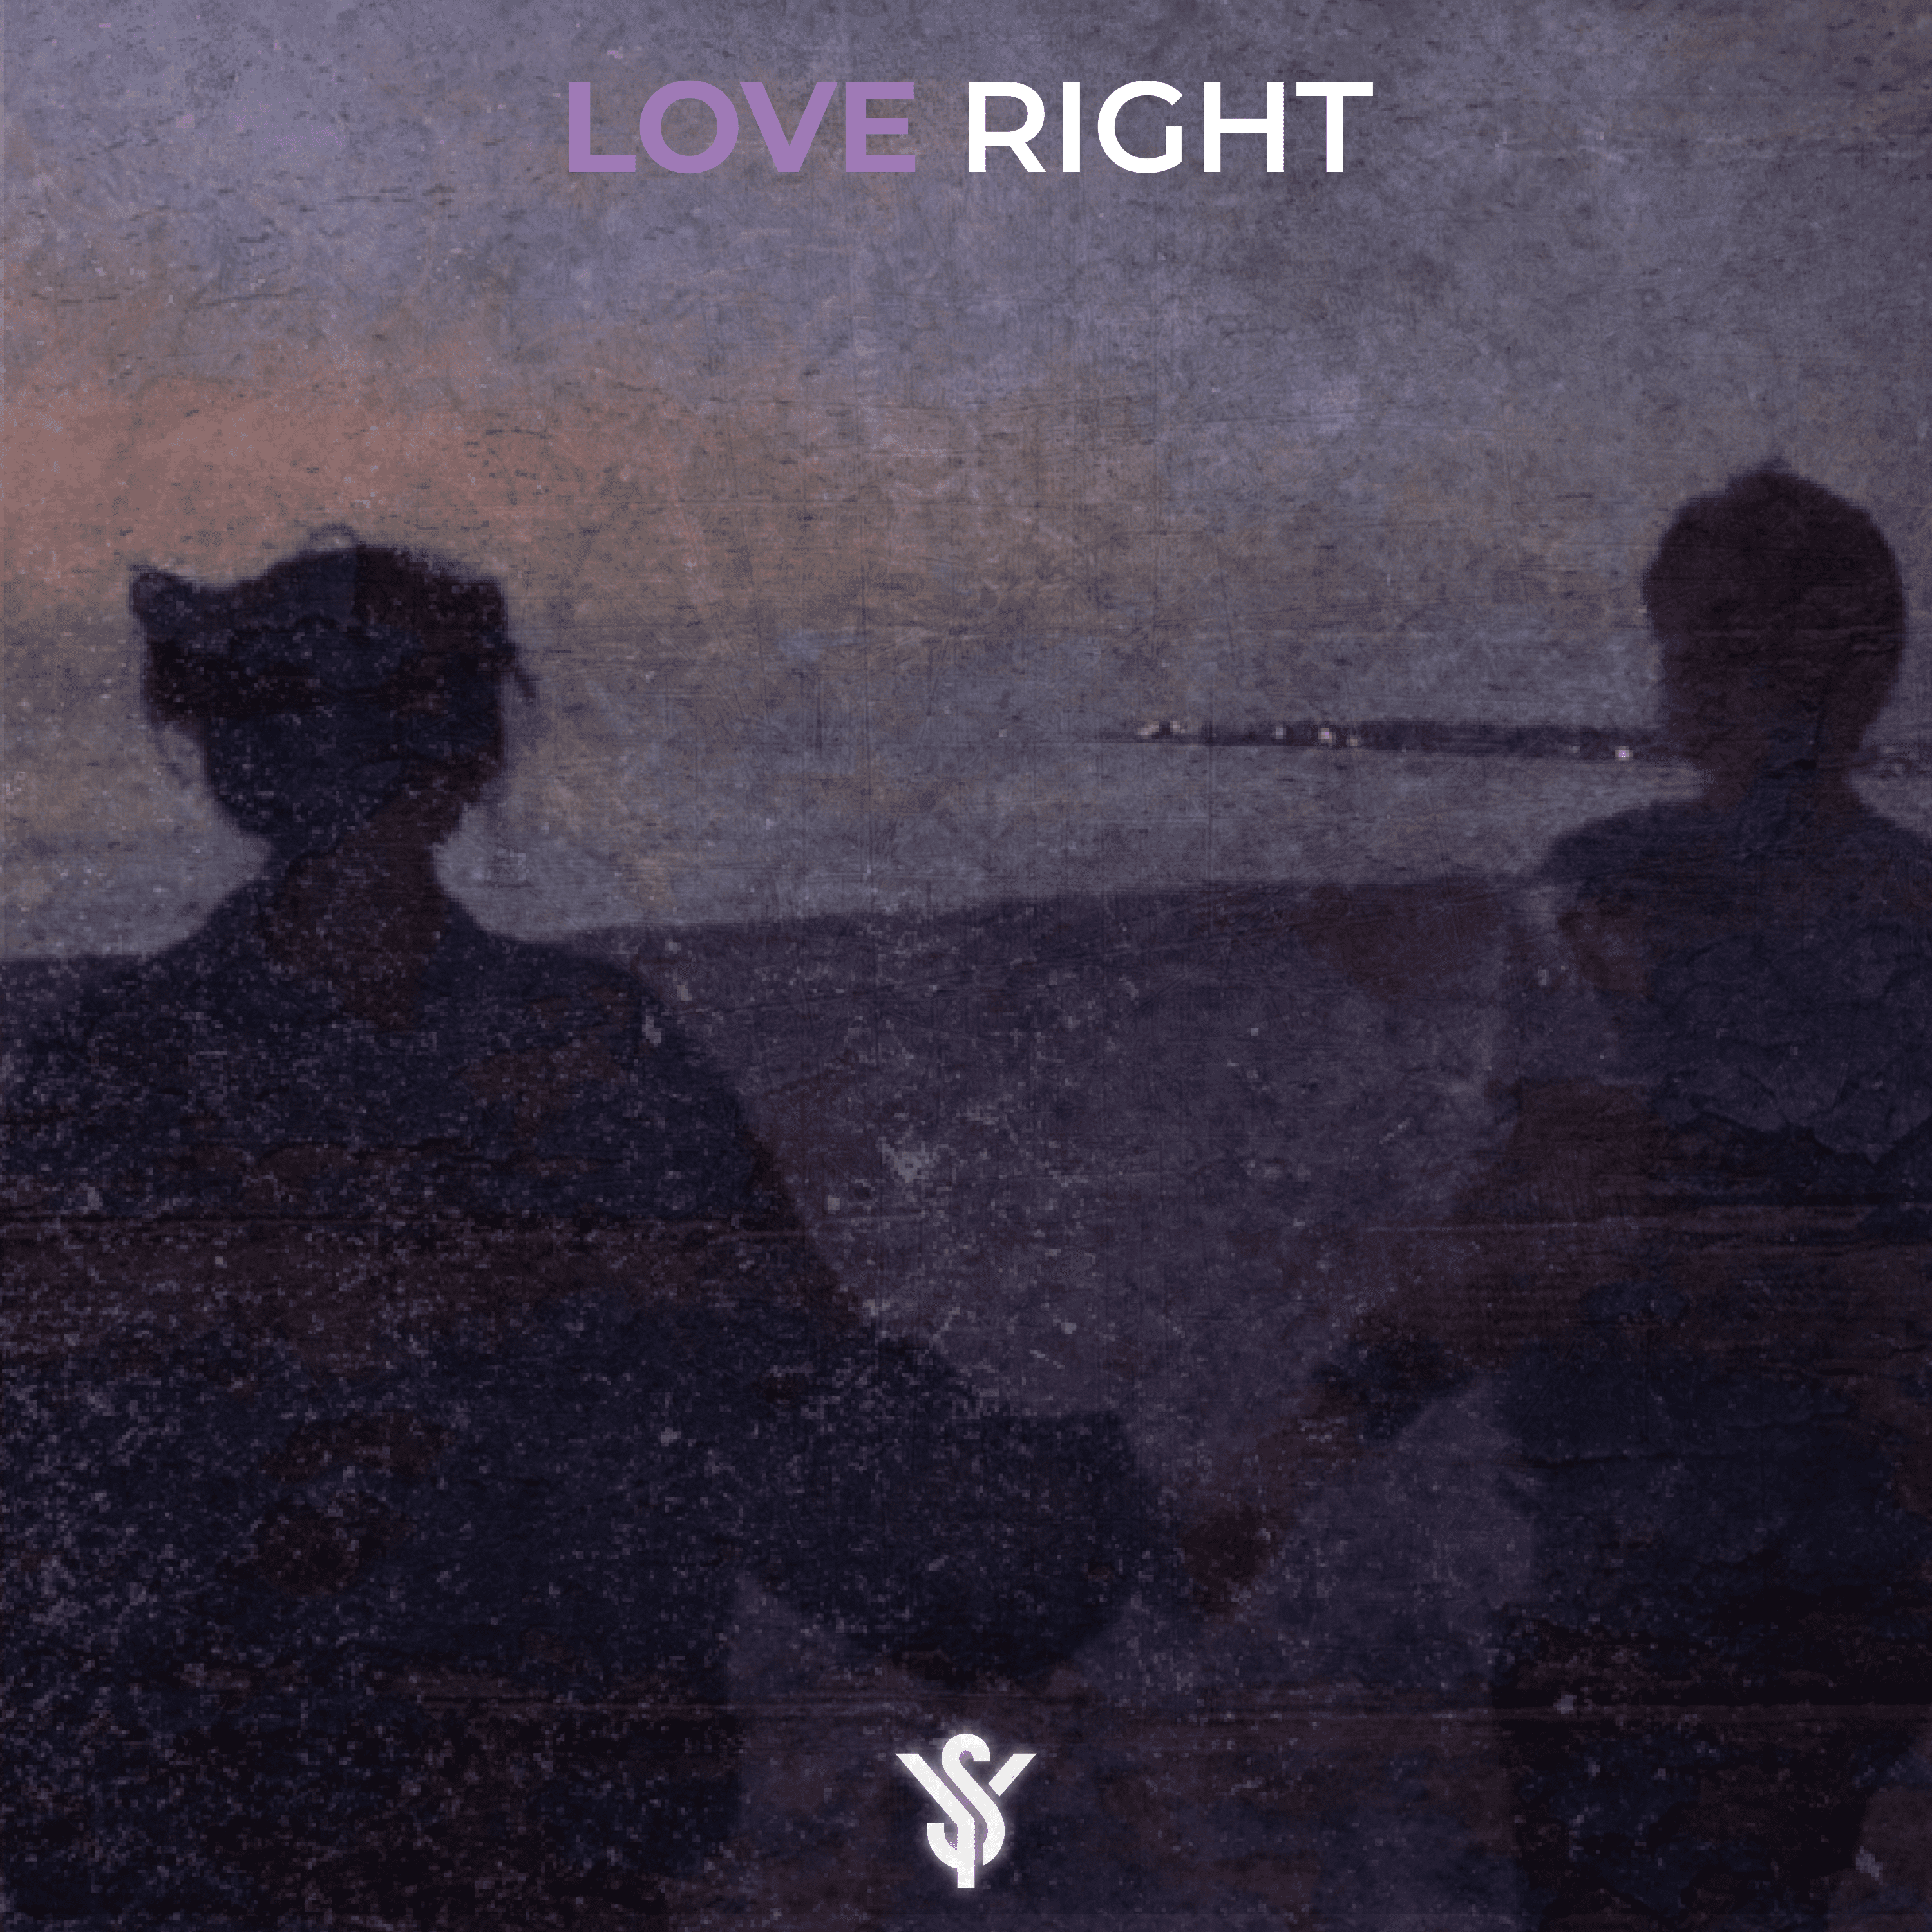 Cover art for Love Right by Shak